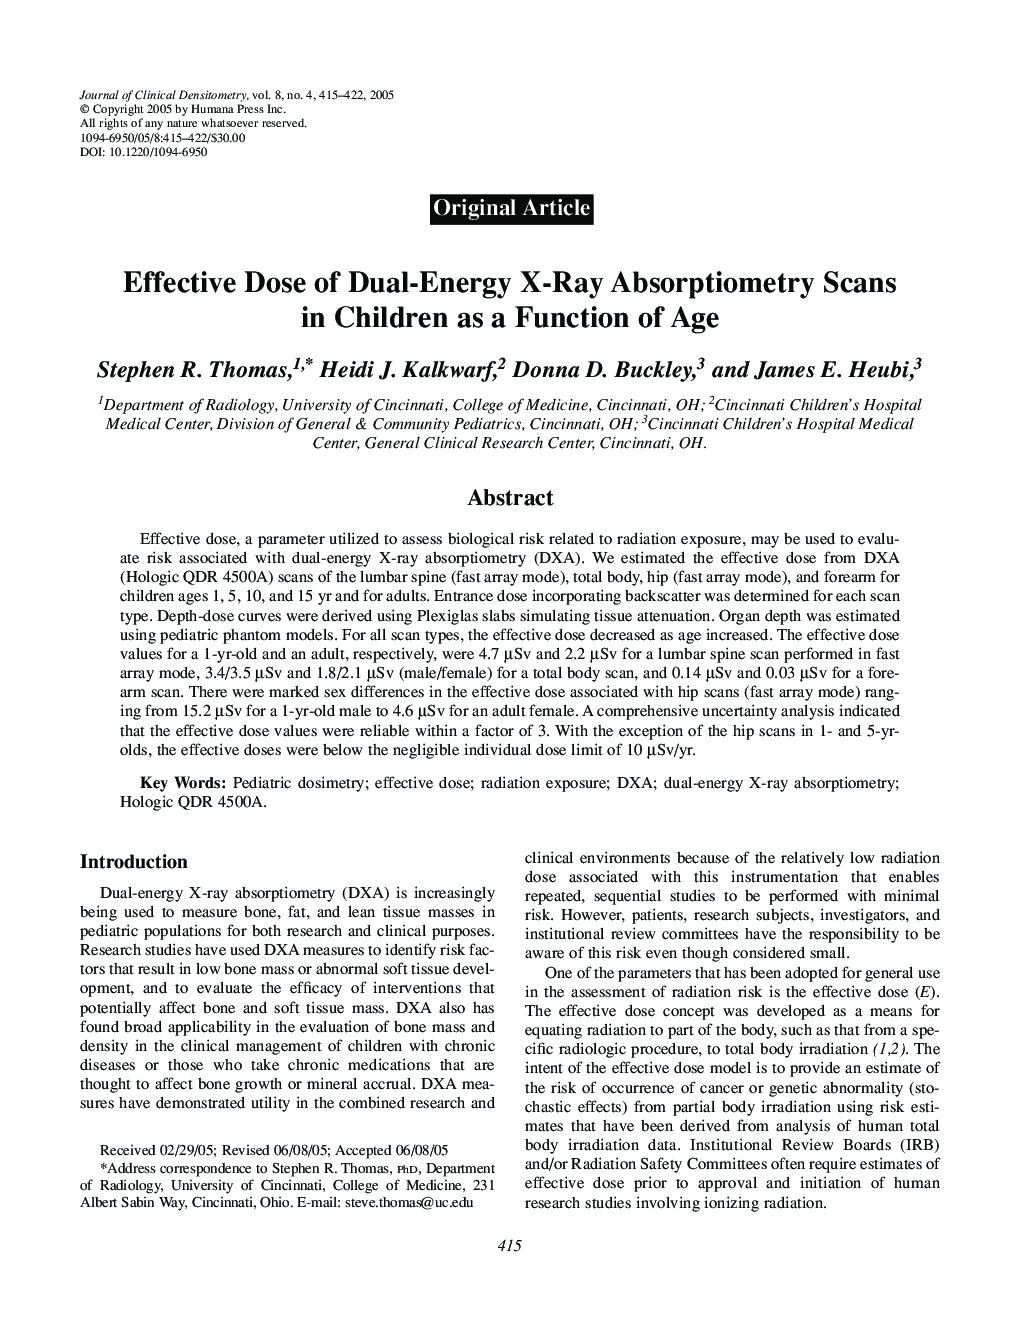 Effective Dose of Dual-Energy X-Ray Absorptiometry Scans in Children as a Function of Age